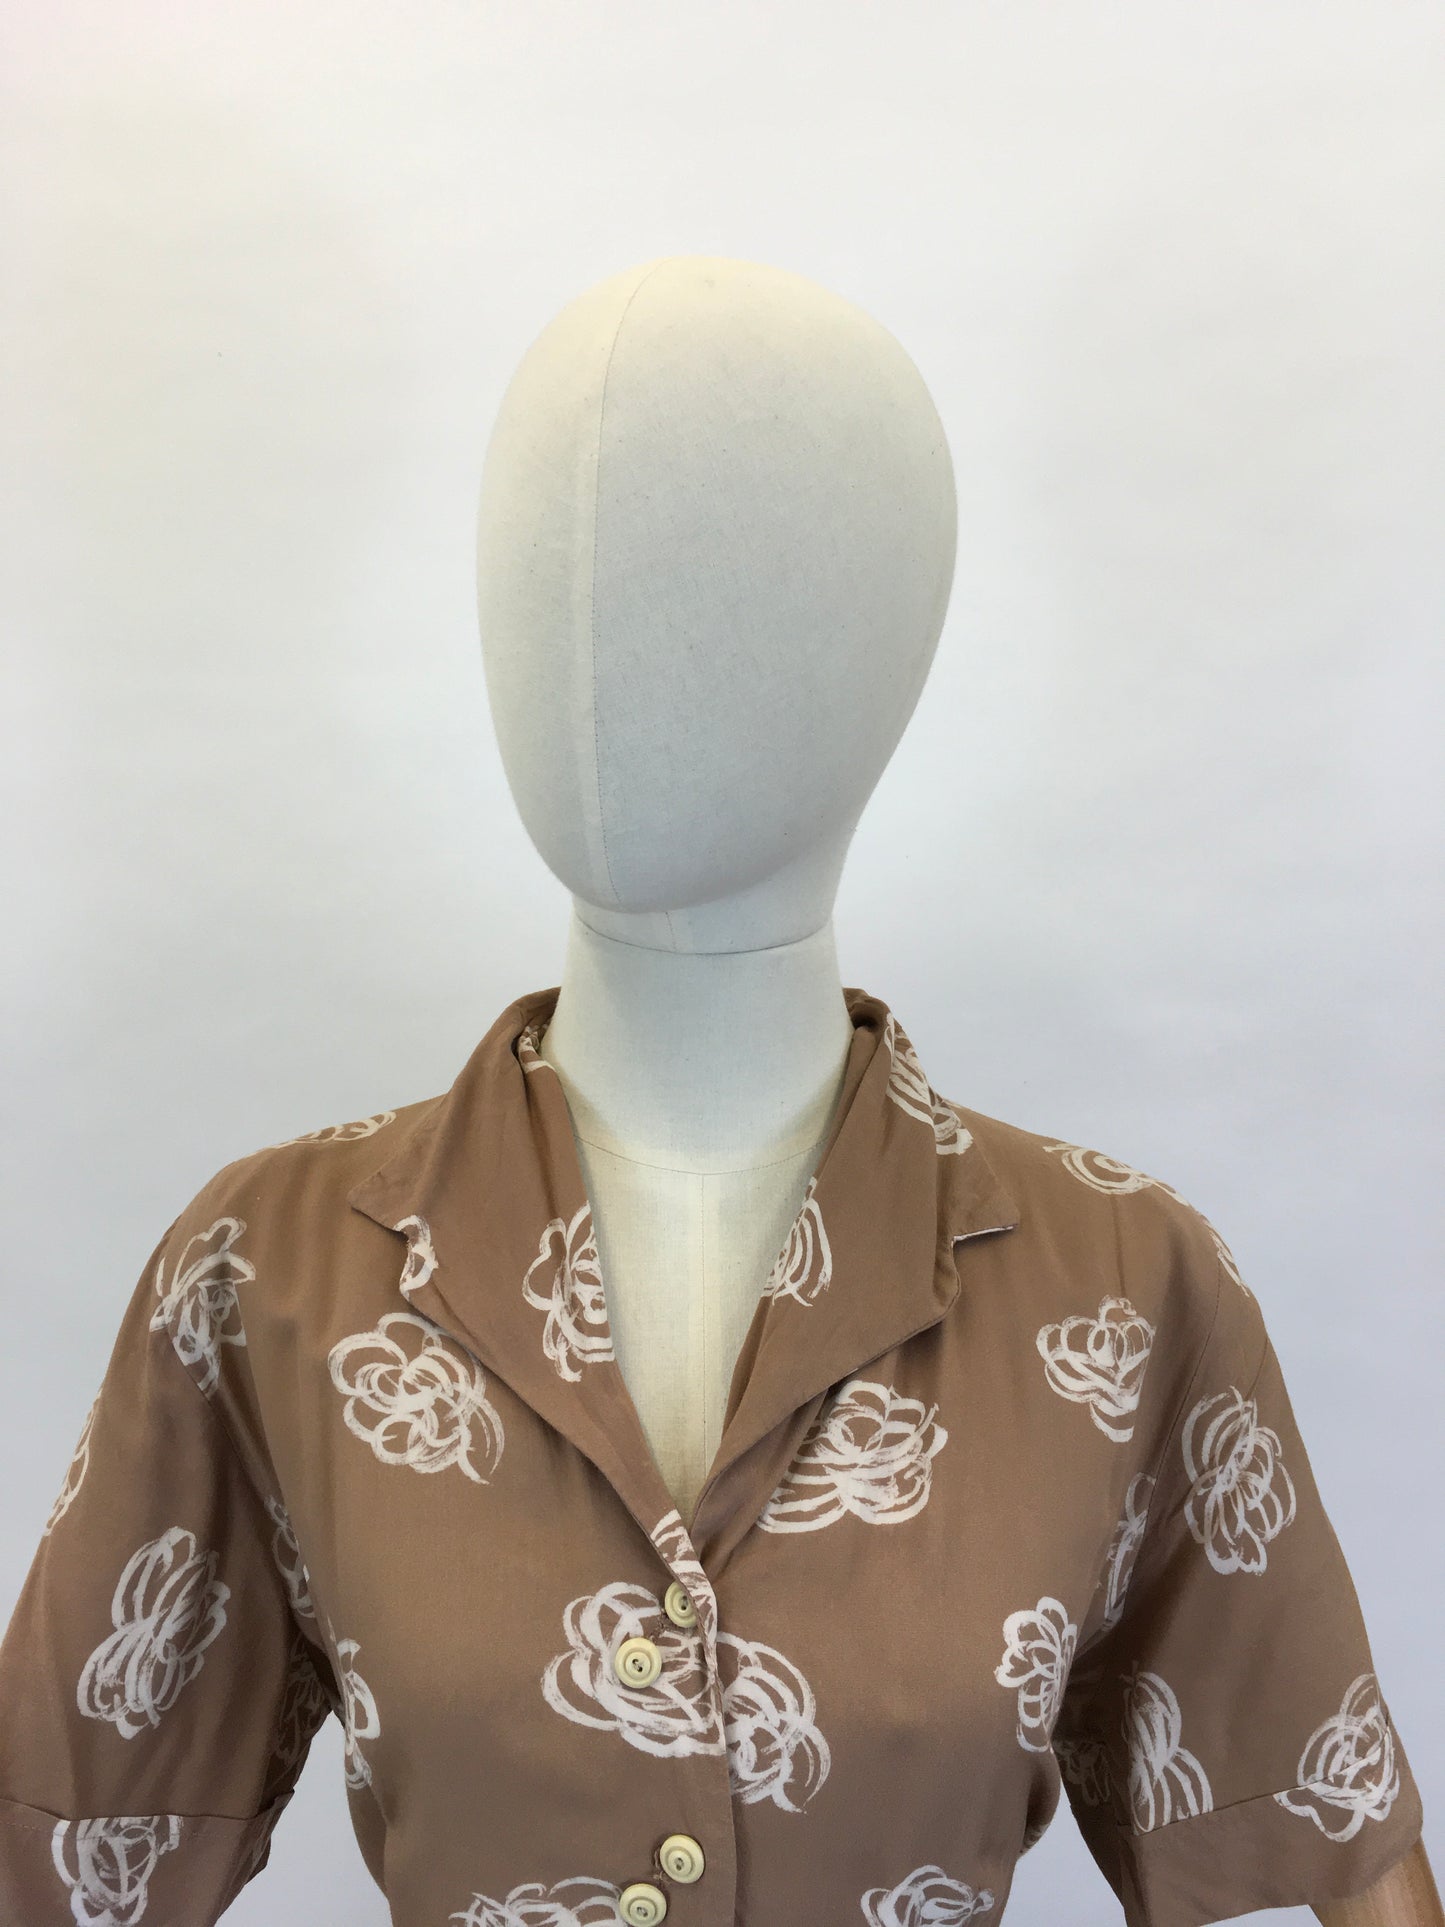 Original 1940’s VOLUP Day Dress - In A Brown & White Floral Swirl Print Cotton